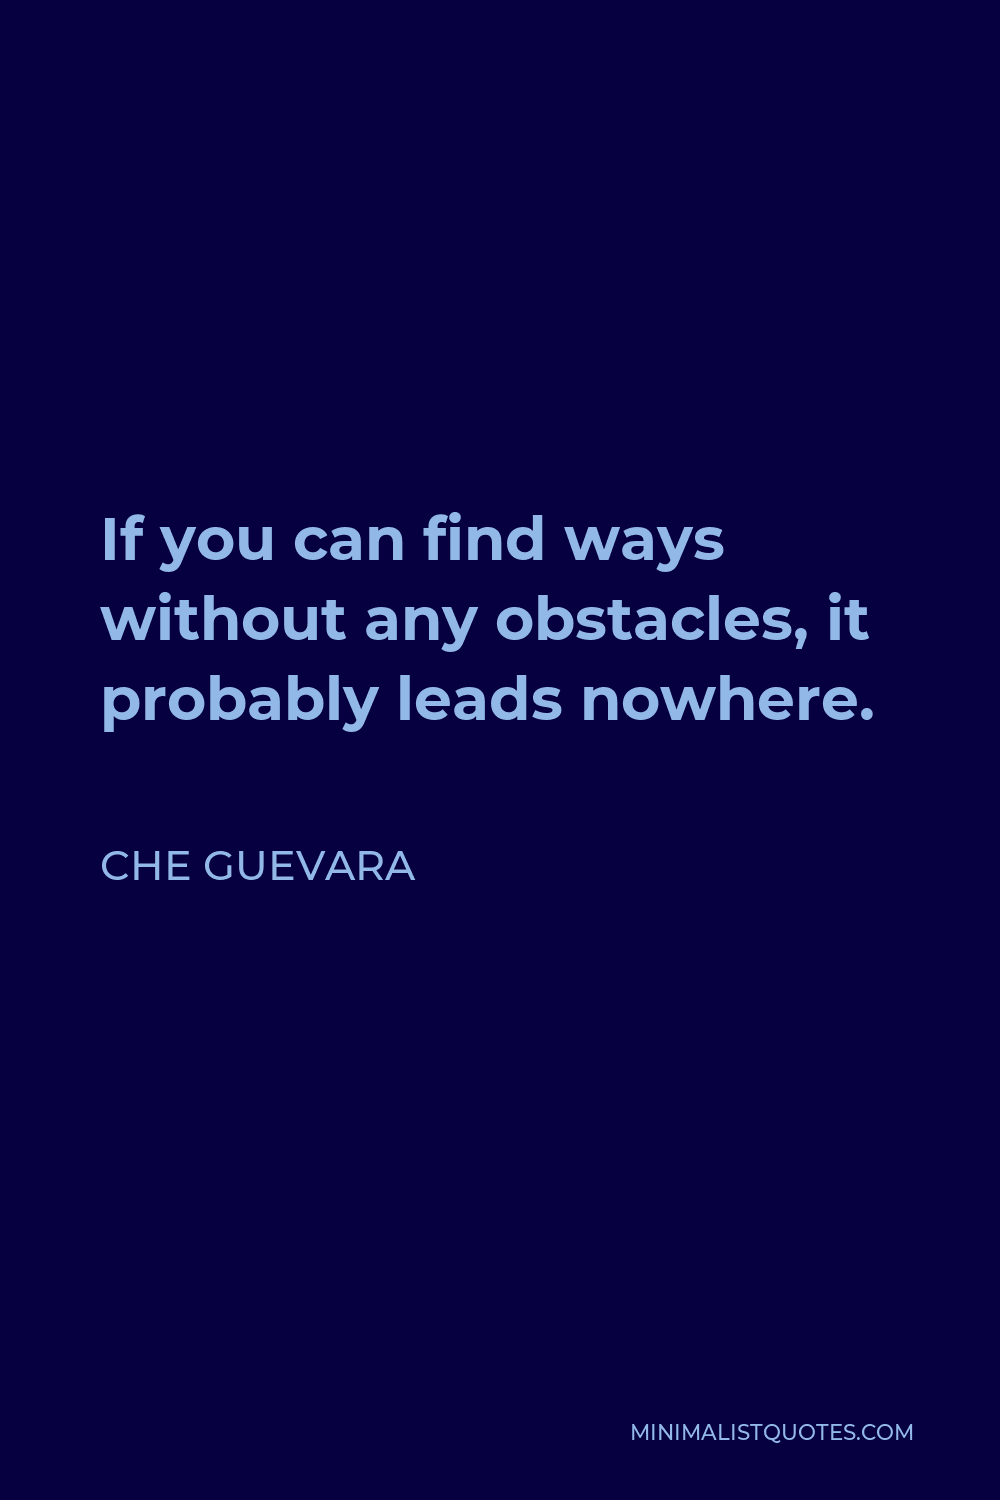 Che Guevara Quote - If you can find ways without any obstacles, it probably leads nowhere.